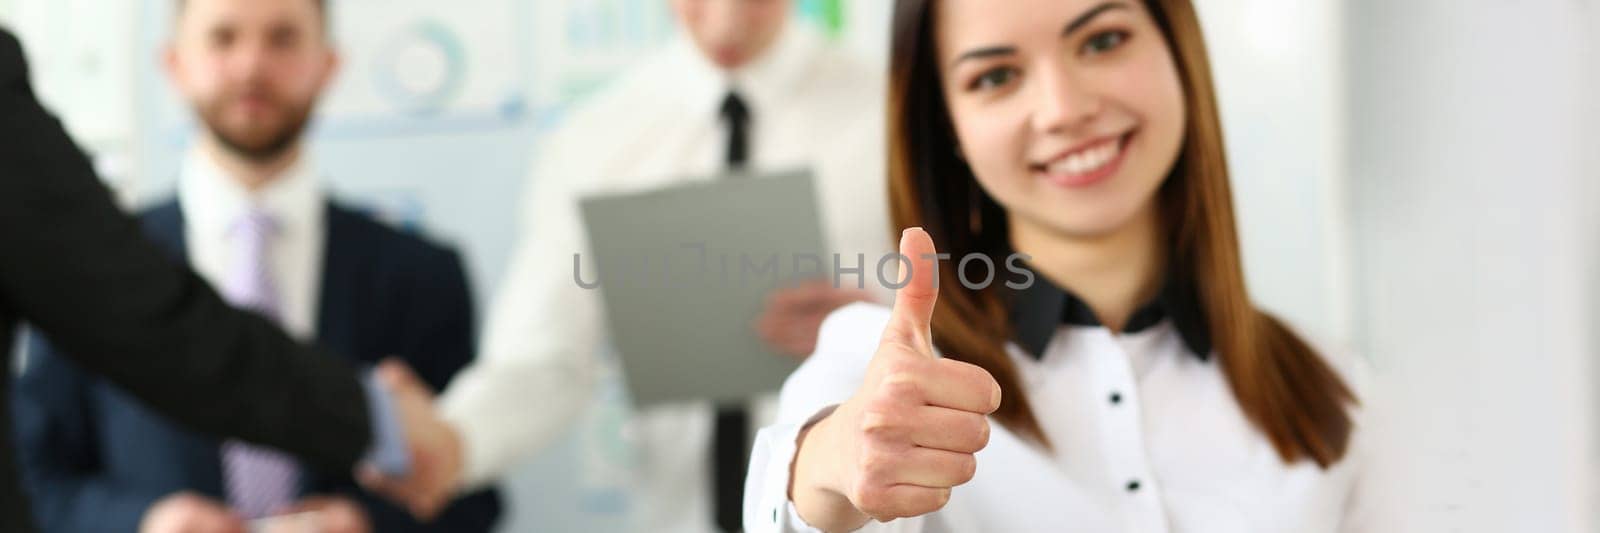 Businesswoman feels confident in team and thumbs up gesture. Happy businesswoman showing thumbs up and smiling colleagues standing in background